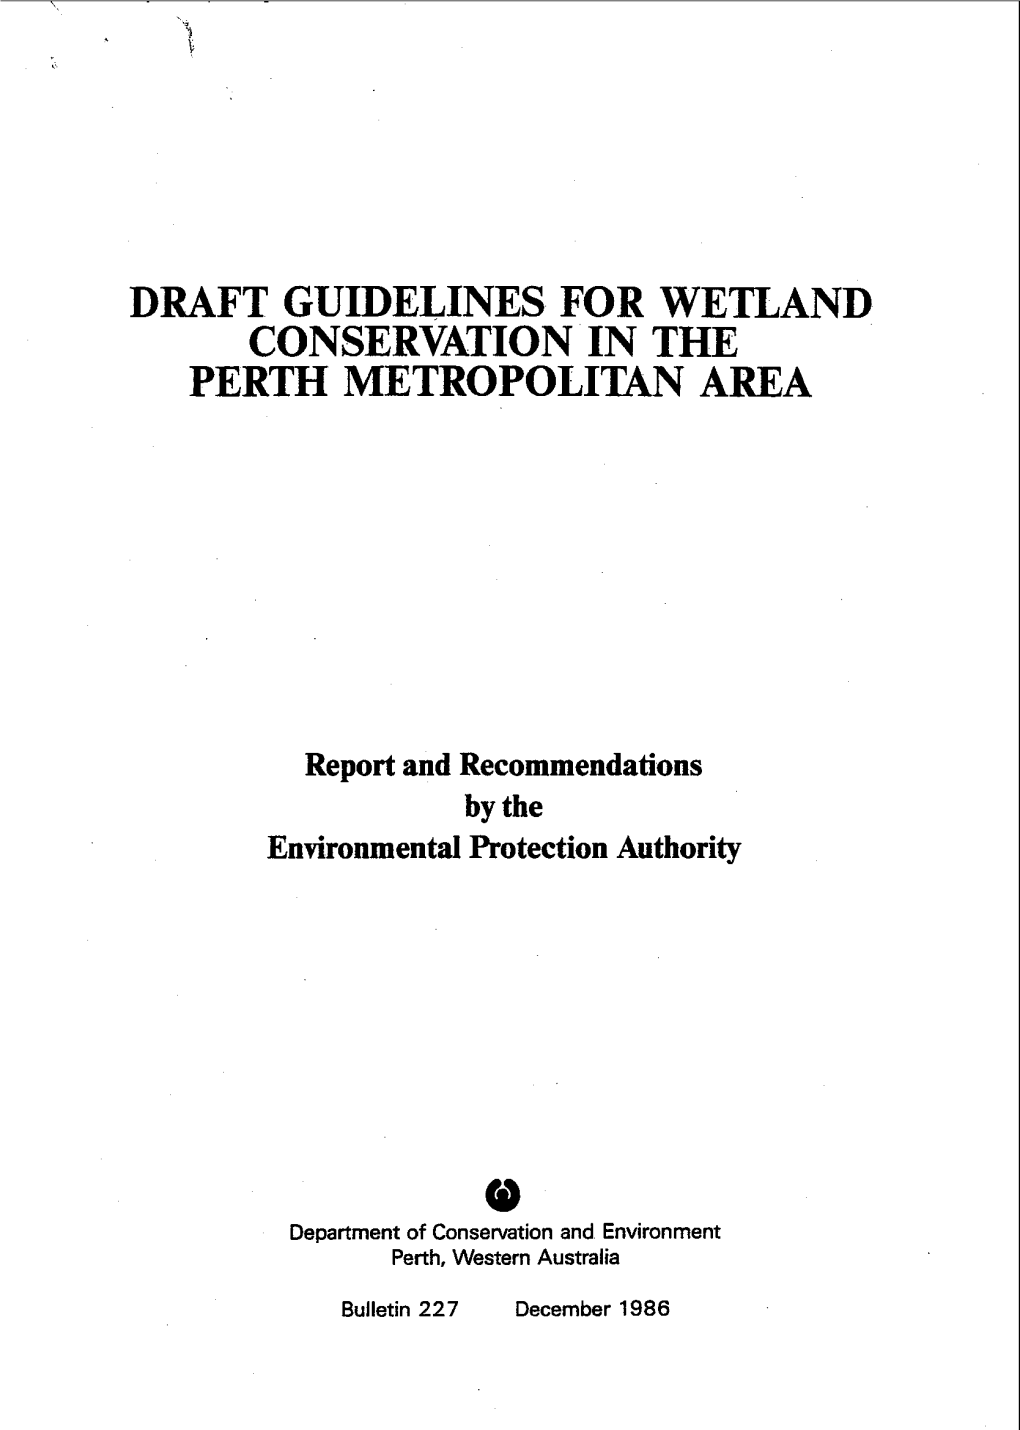 Draft Guidelines for Wetland Conservation in the Perth Metropolitan Area